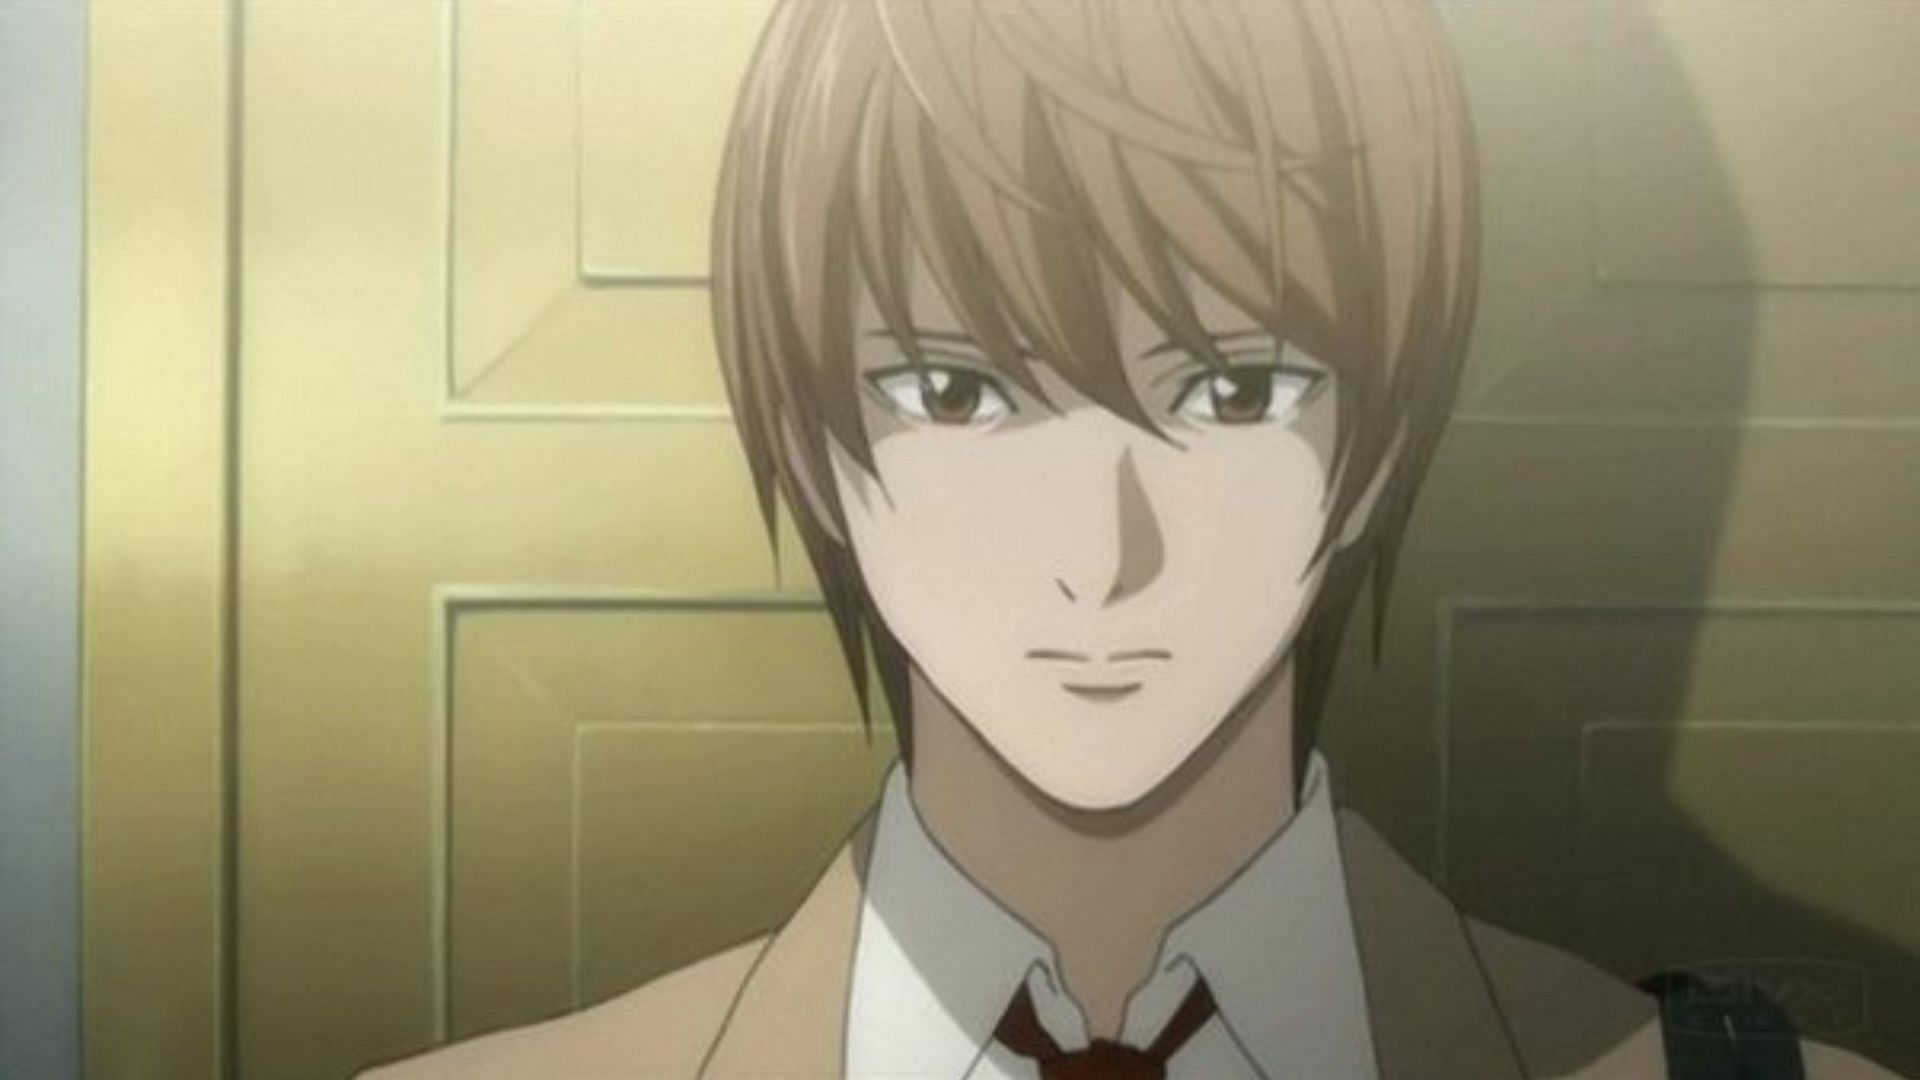 Light Yagami as shown in anime (Image via Studio Madhouse)